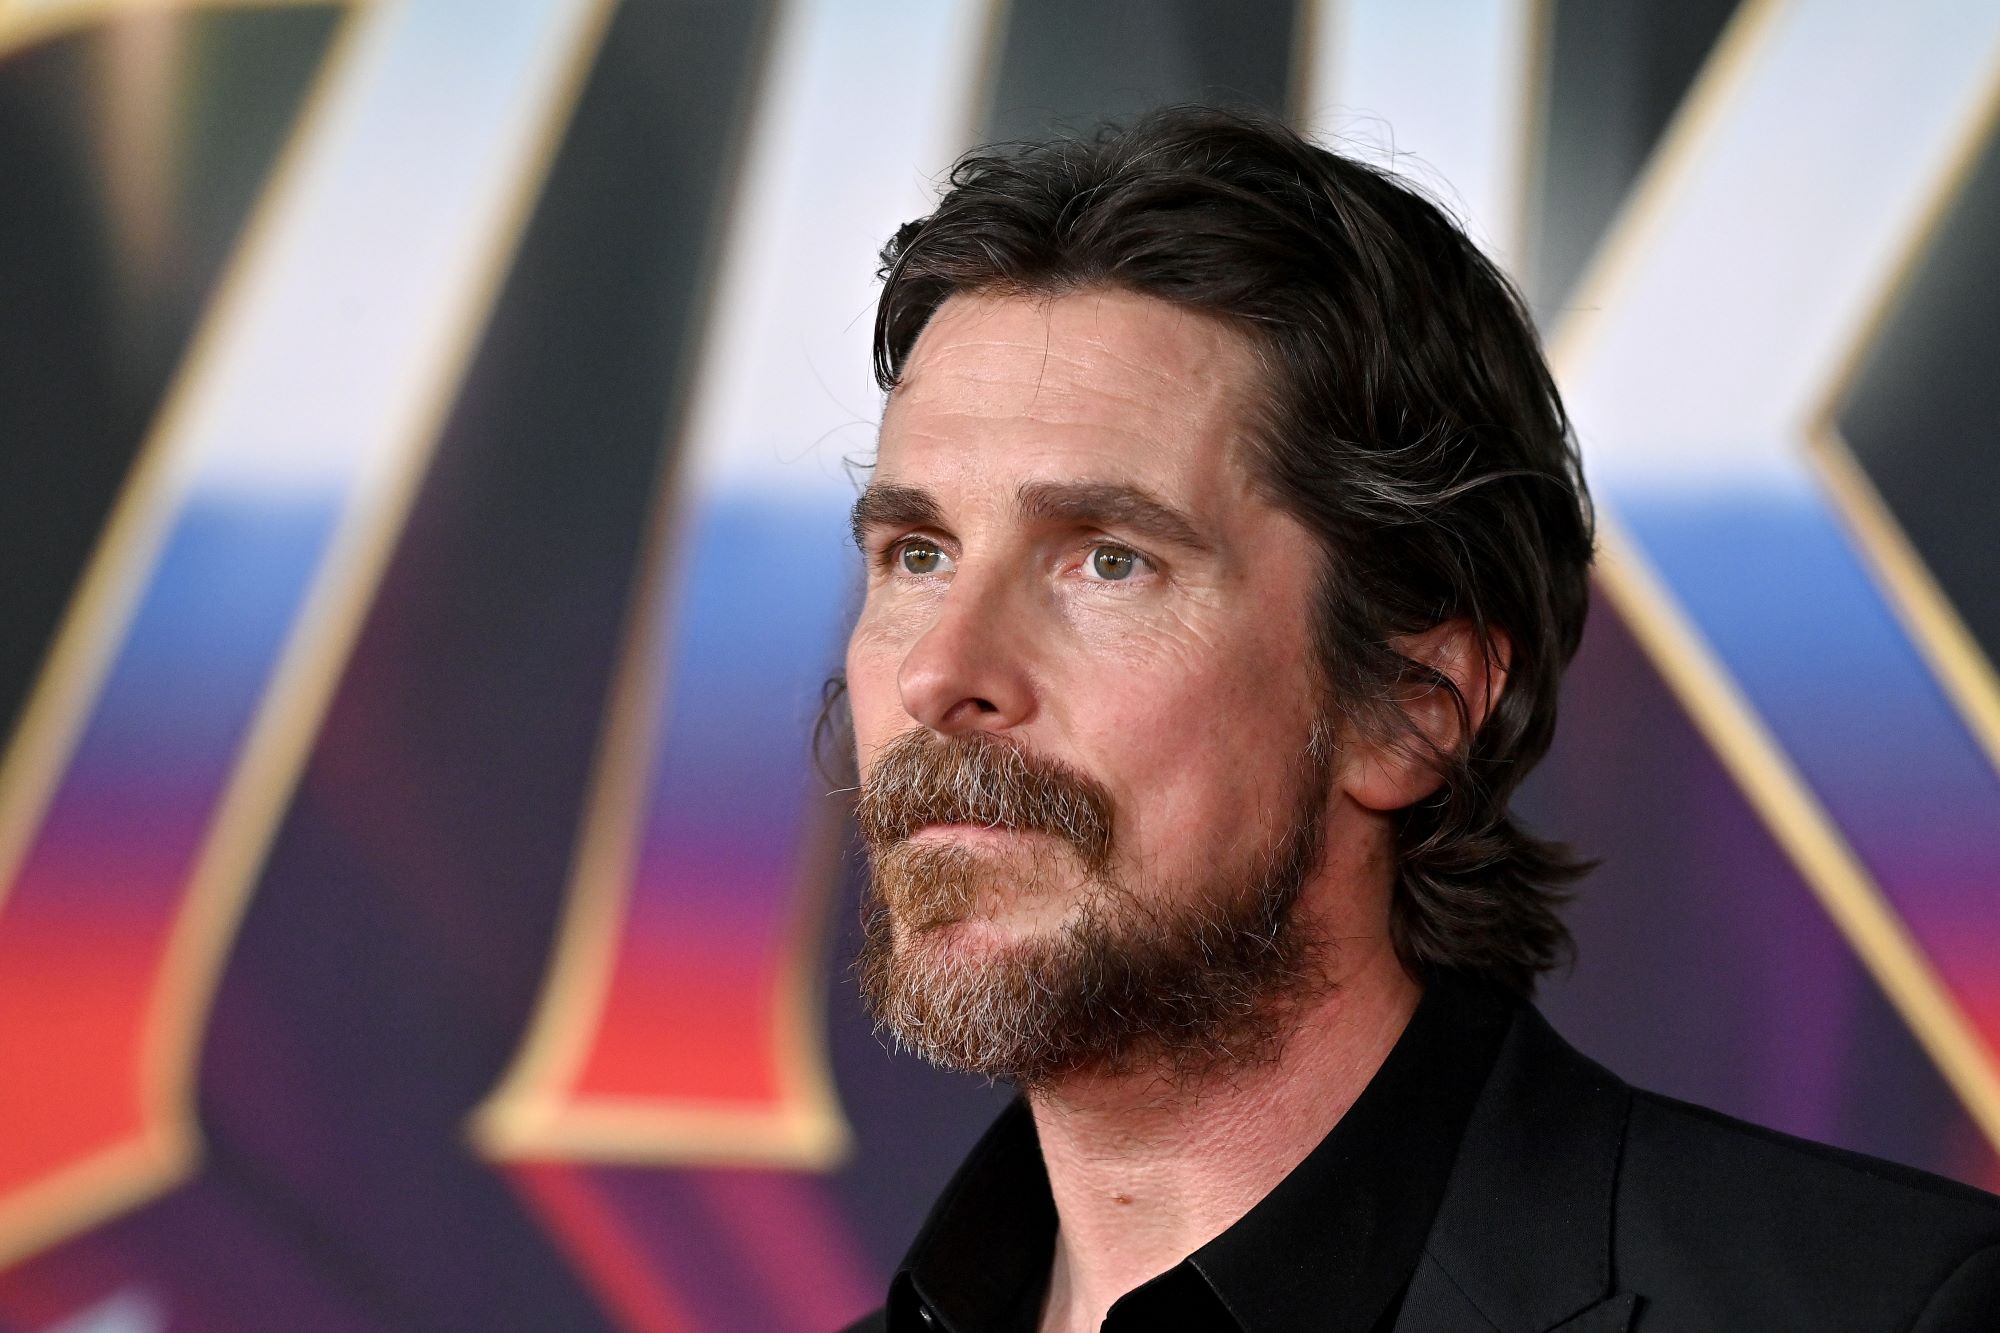 Thor 4 leaked merch reveals Christian Bale's look as the film's